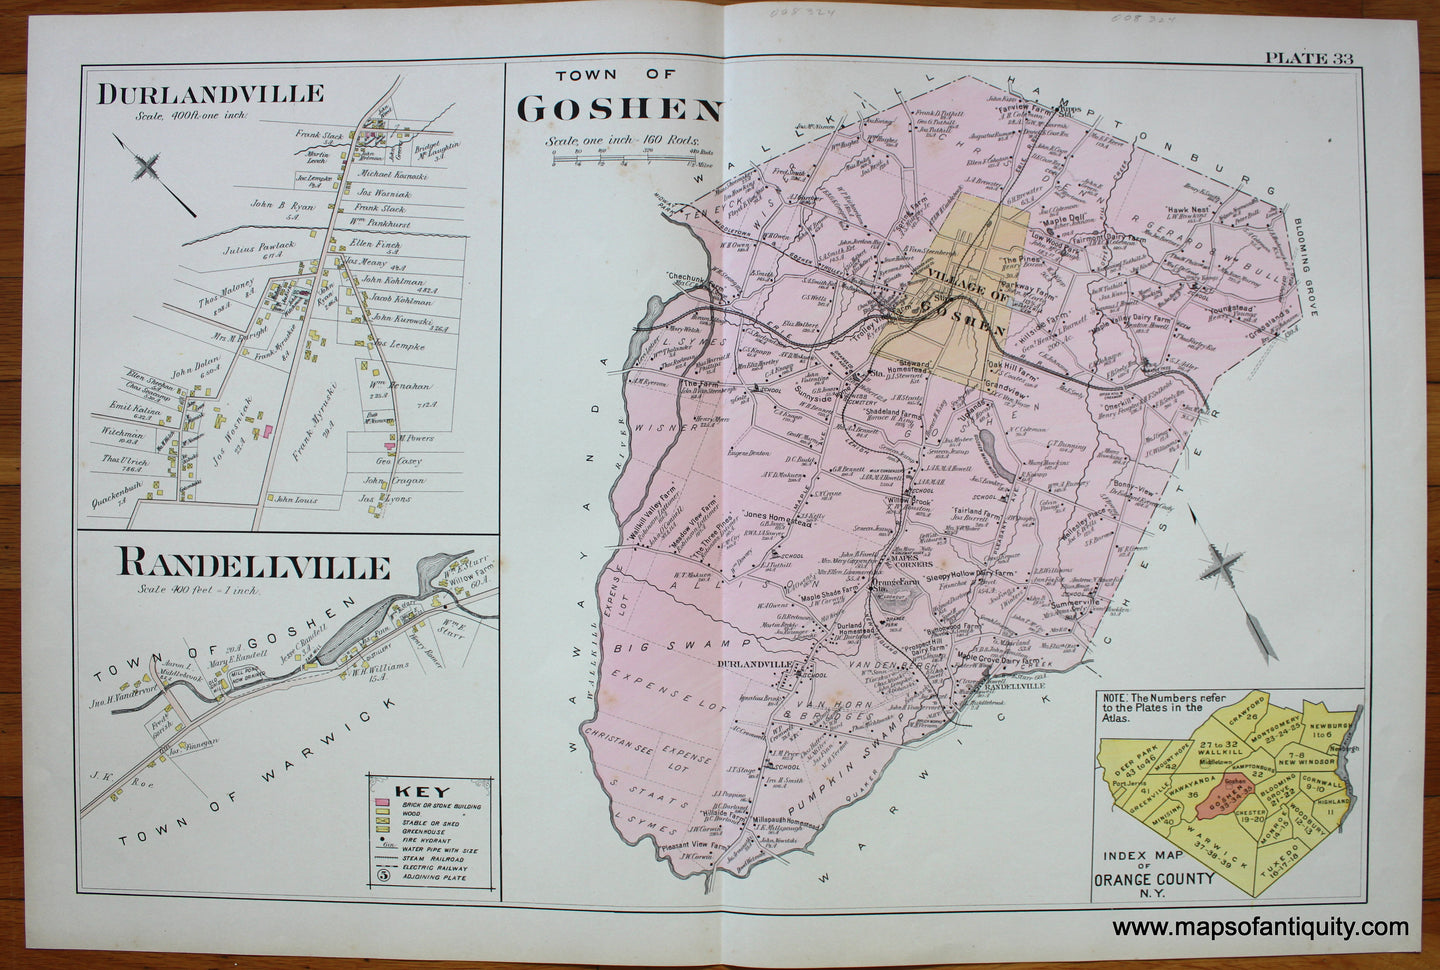 Antique-Printed-Color-Map-Town-of-Goshen-NY-1903-Lathrop-/-A.-H.-Mueller-&-Co-New-York-1800s-19th-century-Maps-of-Antiquity